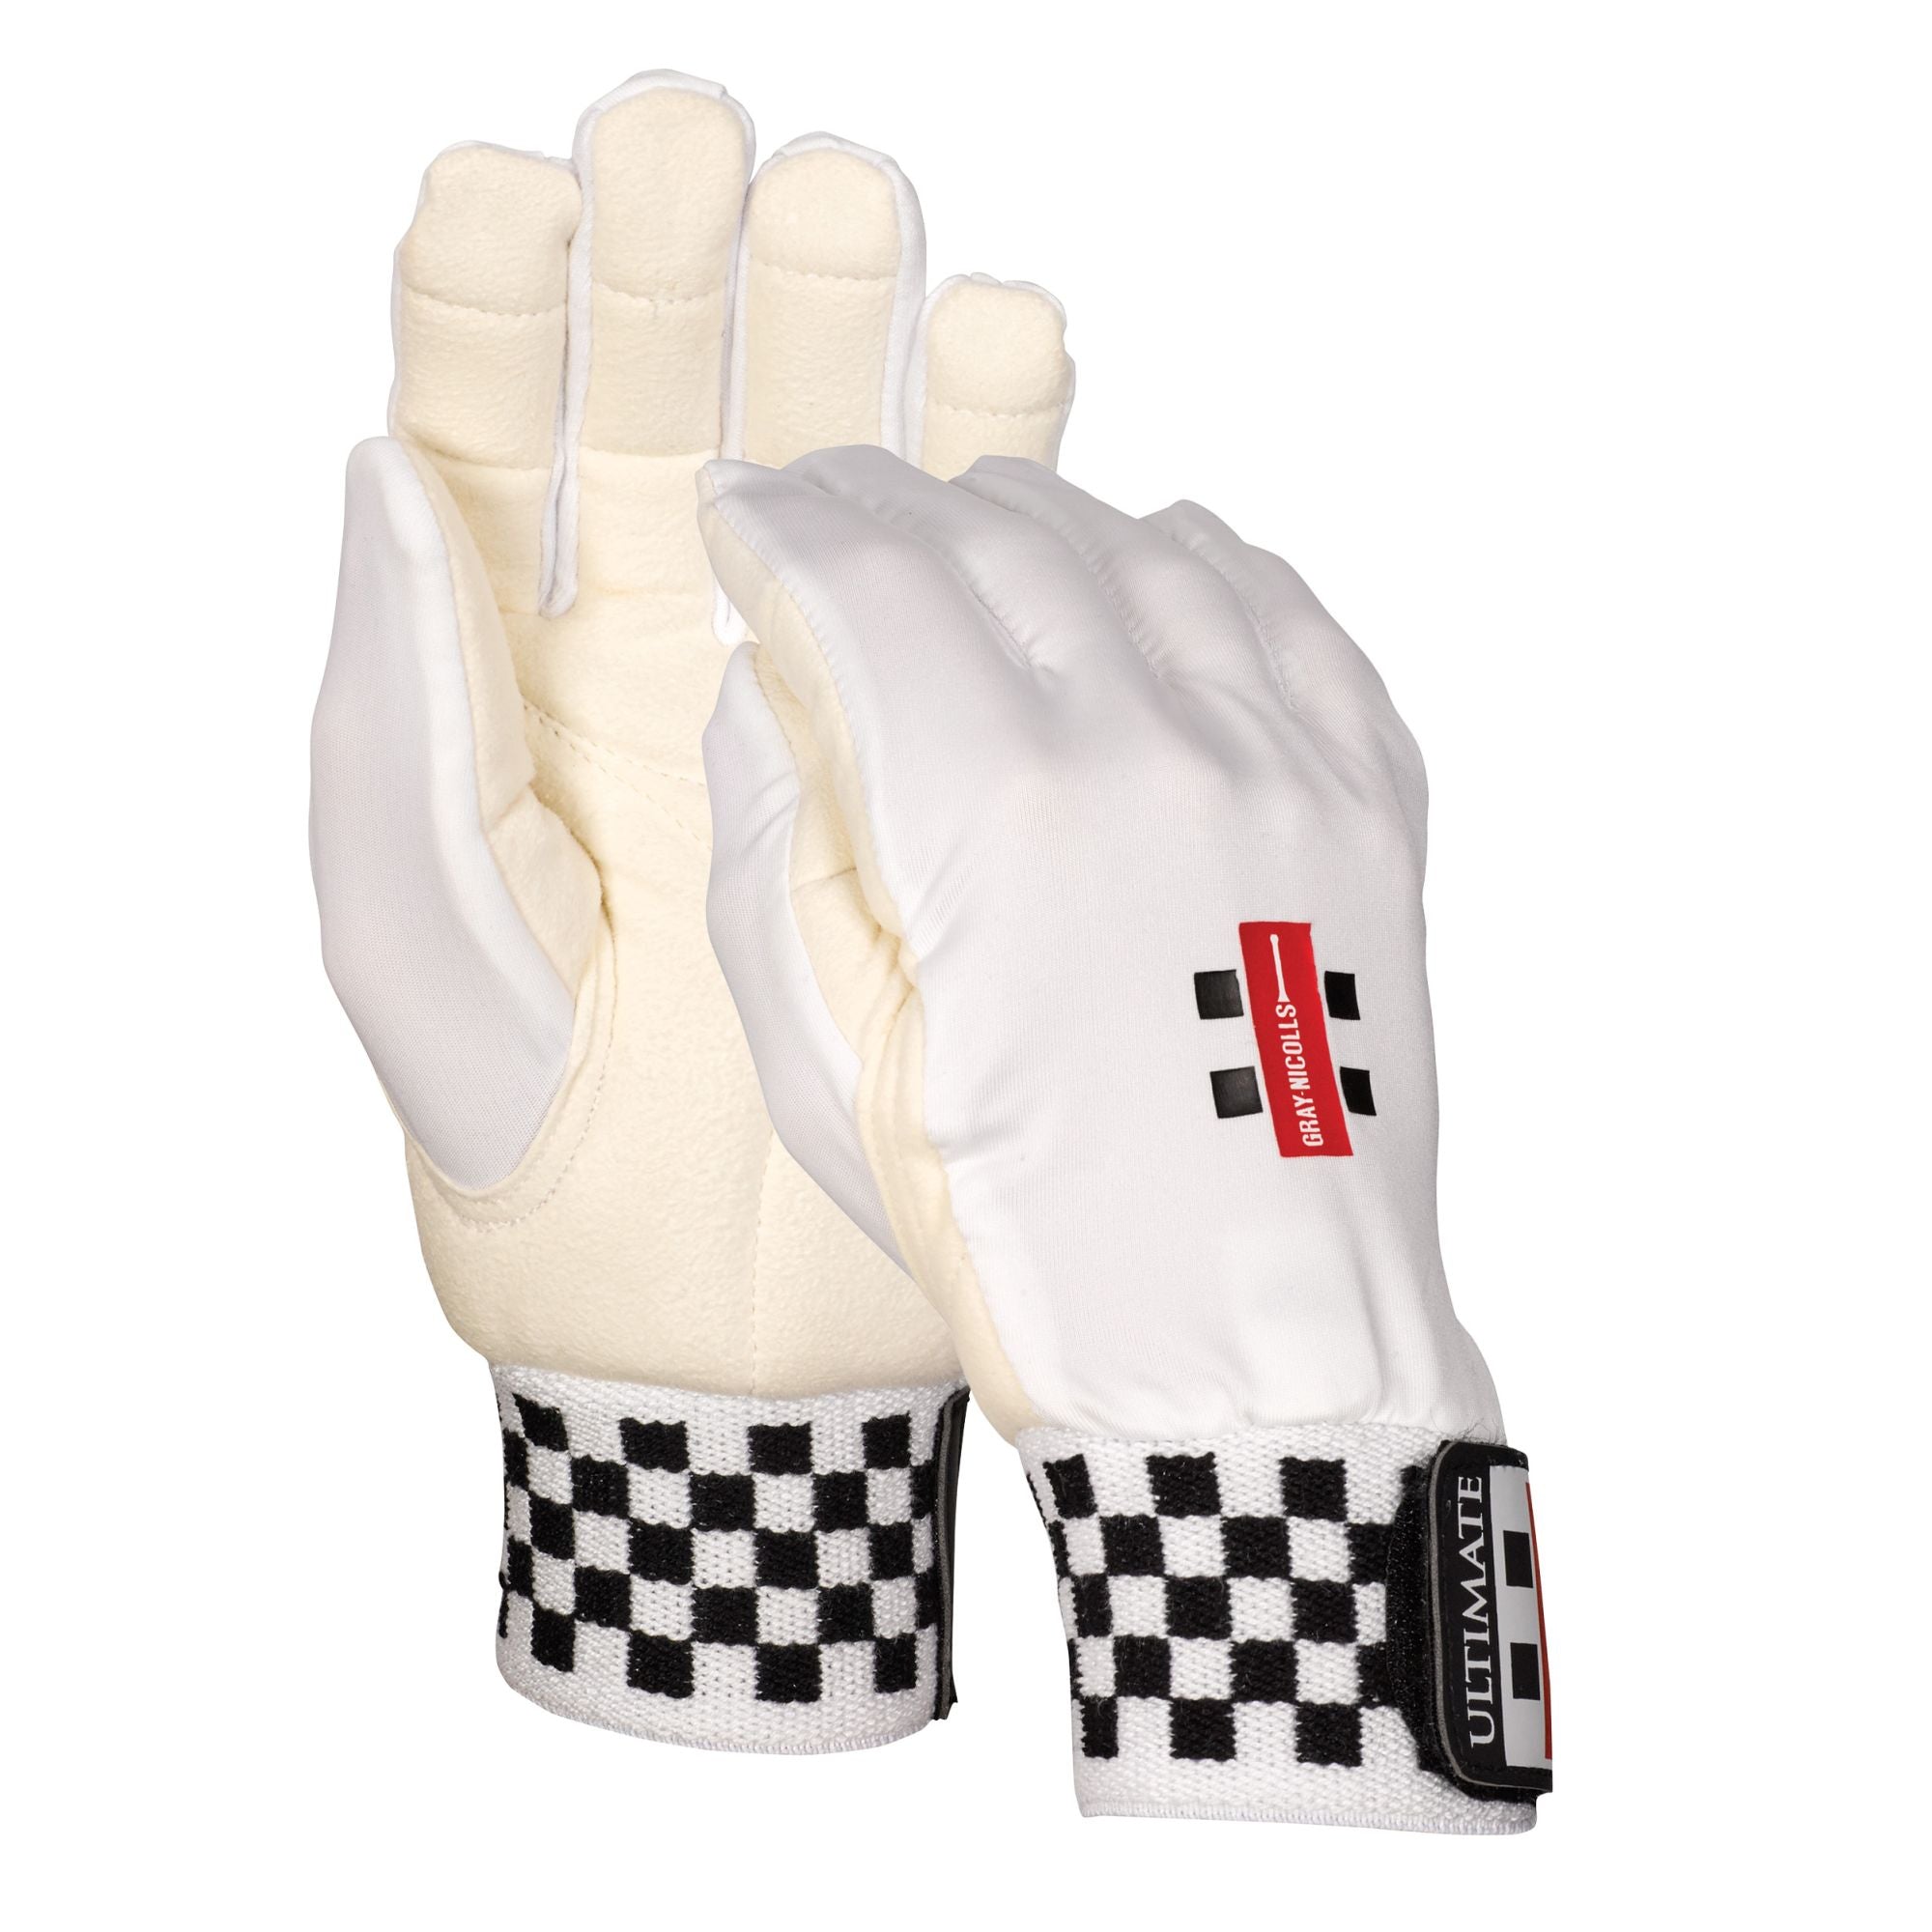 Gray Nicolls Ultimate Chamois Padded Cricket Wicket Keeping Inners